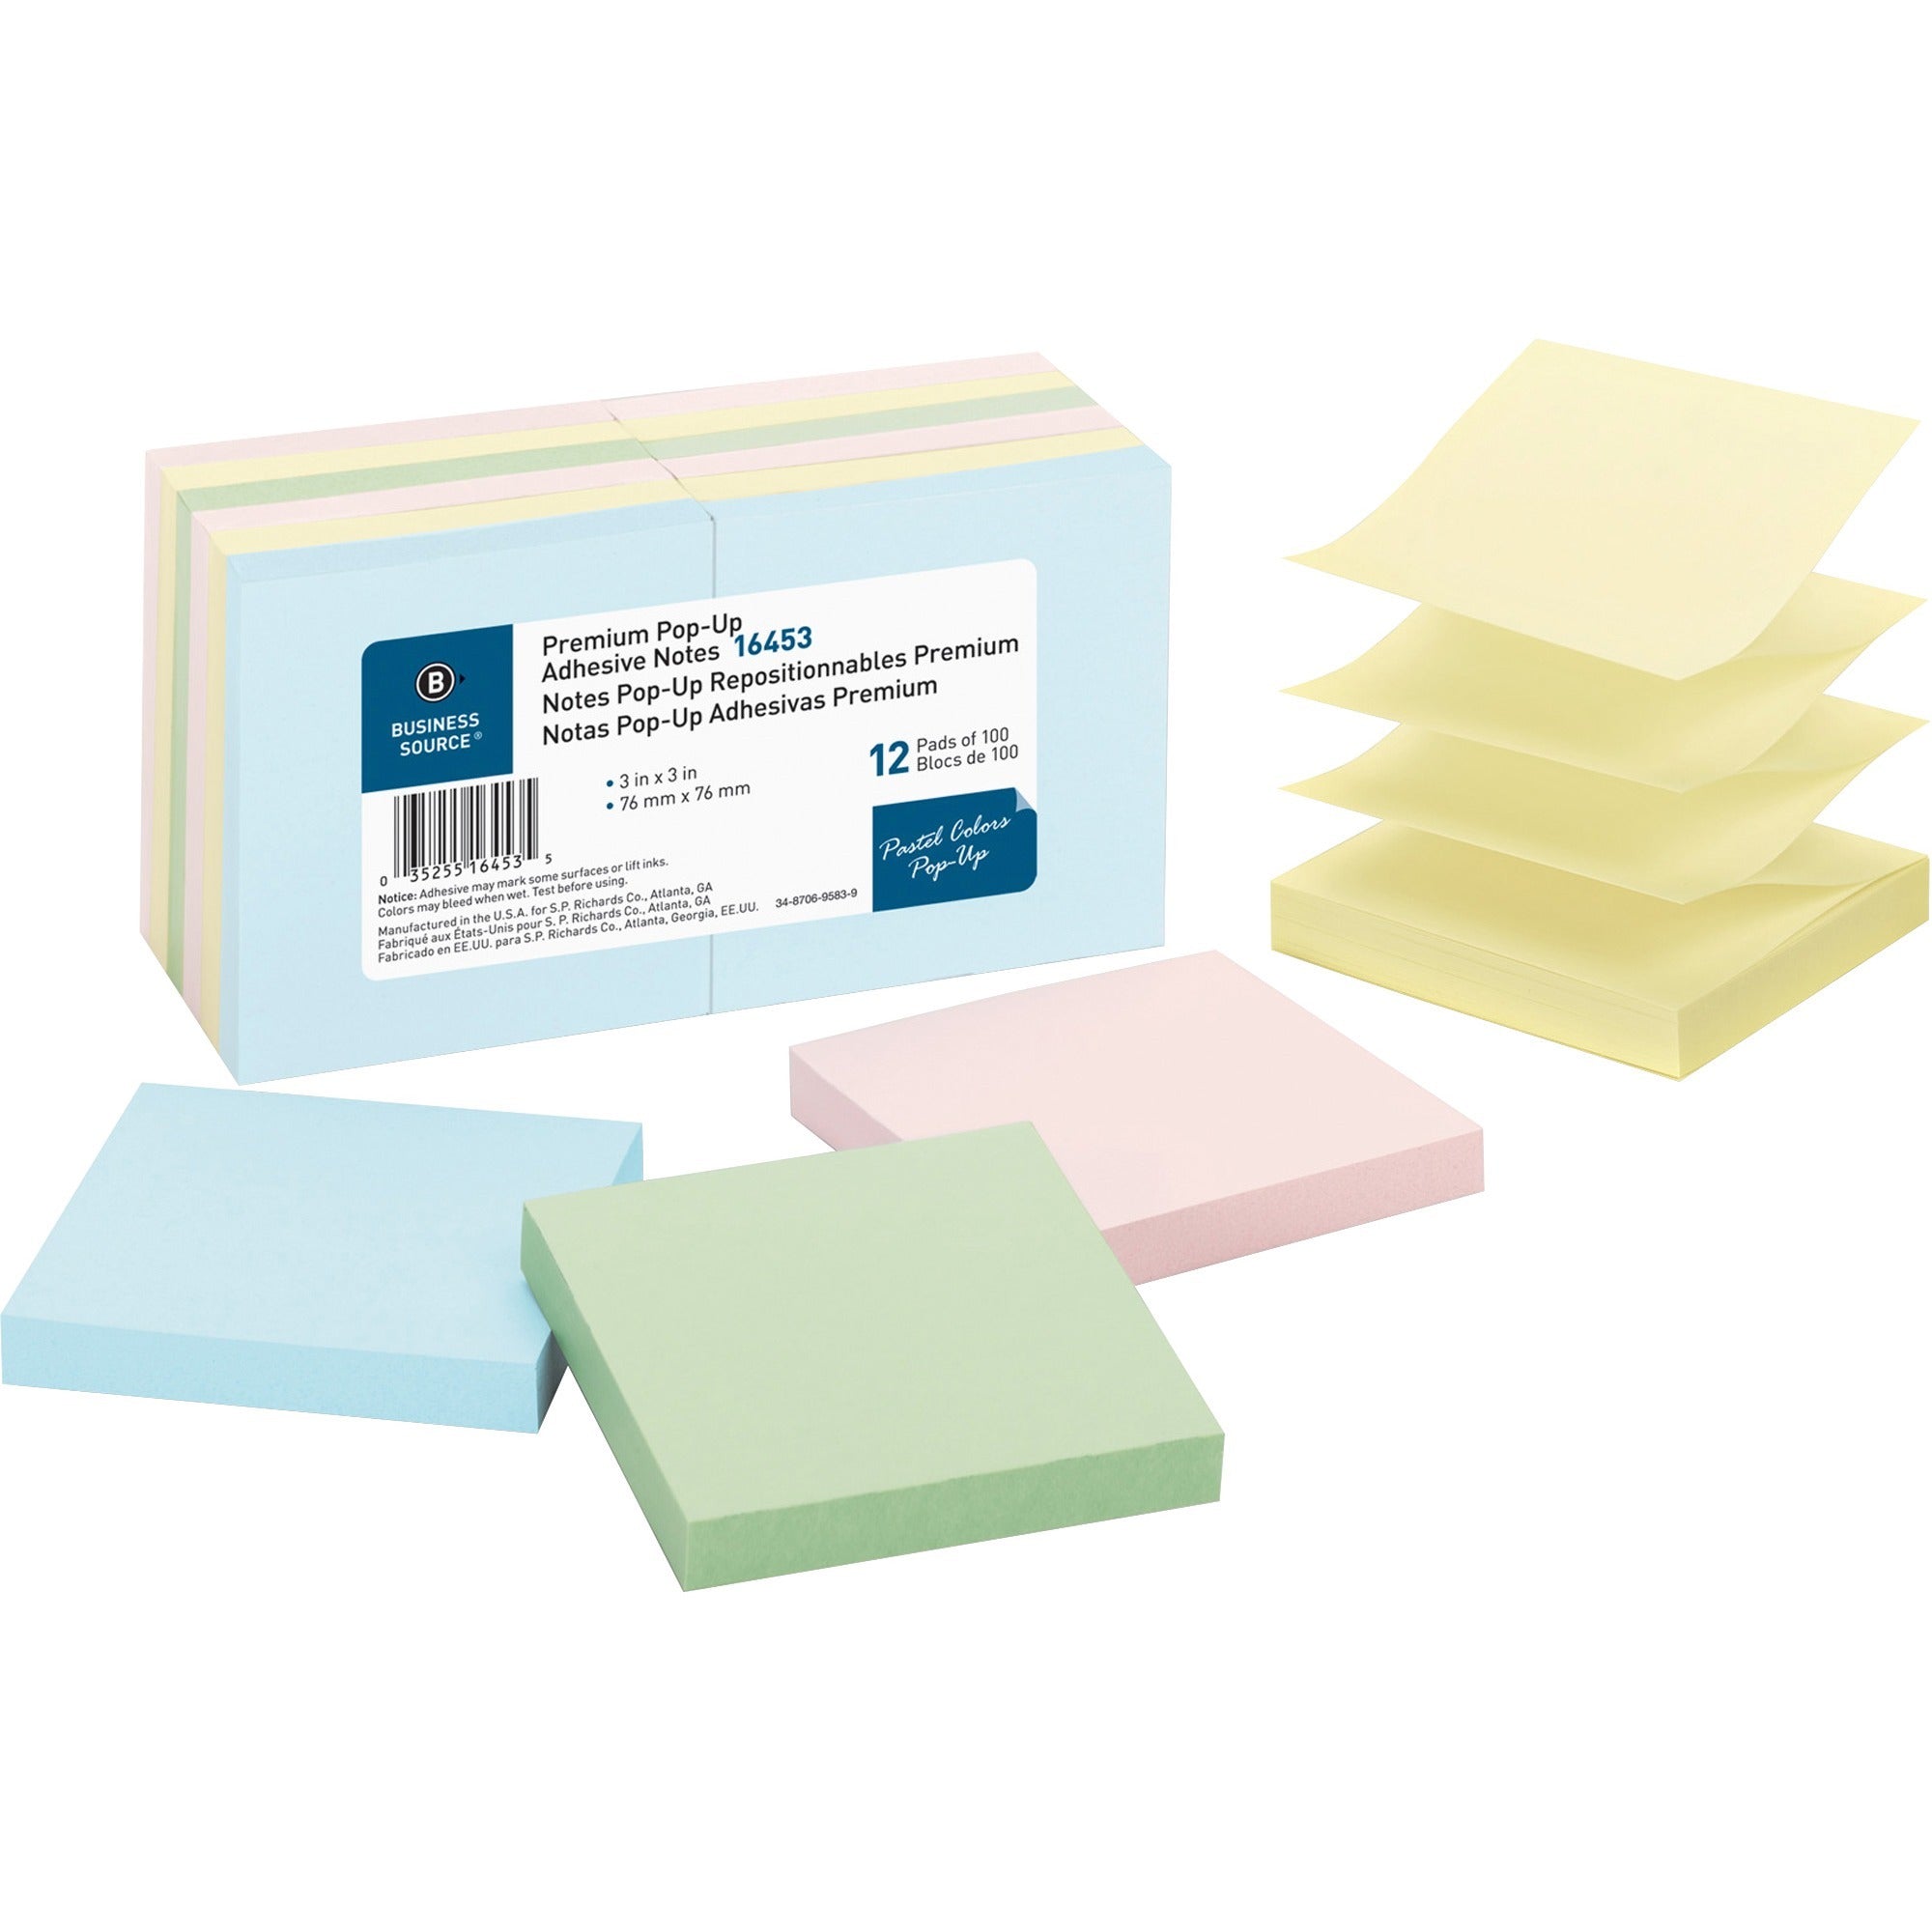 Business Source Reposition Pop-up Adhesive Notes - 3" x 3" - Square - Assorted Pastel - Removable, Repositionable, Solvent-free Adhesive - 12 / Pack - 